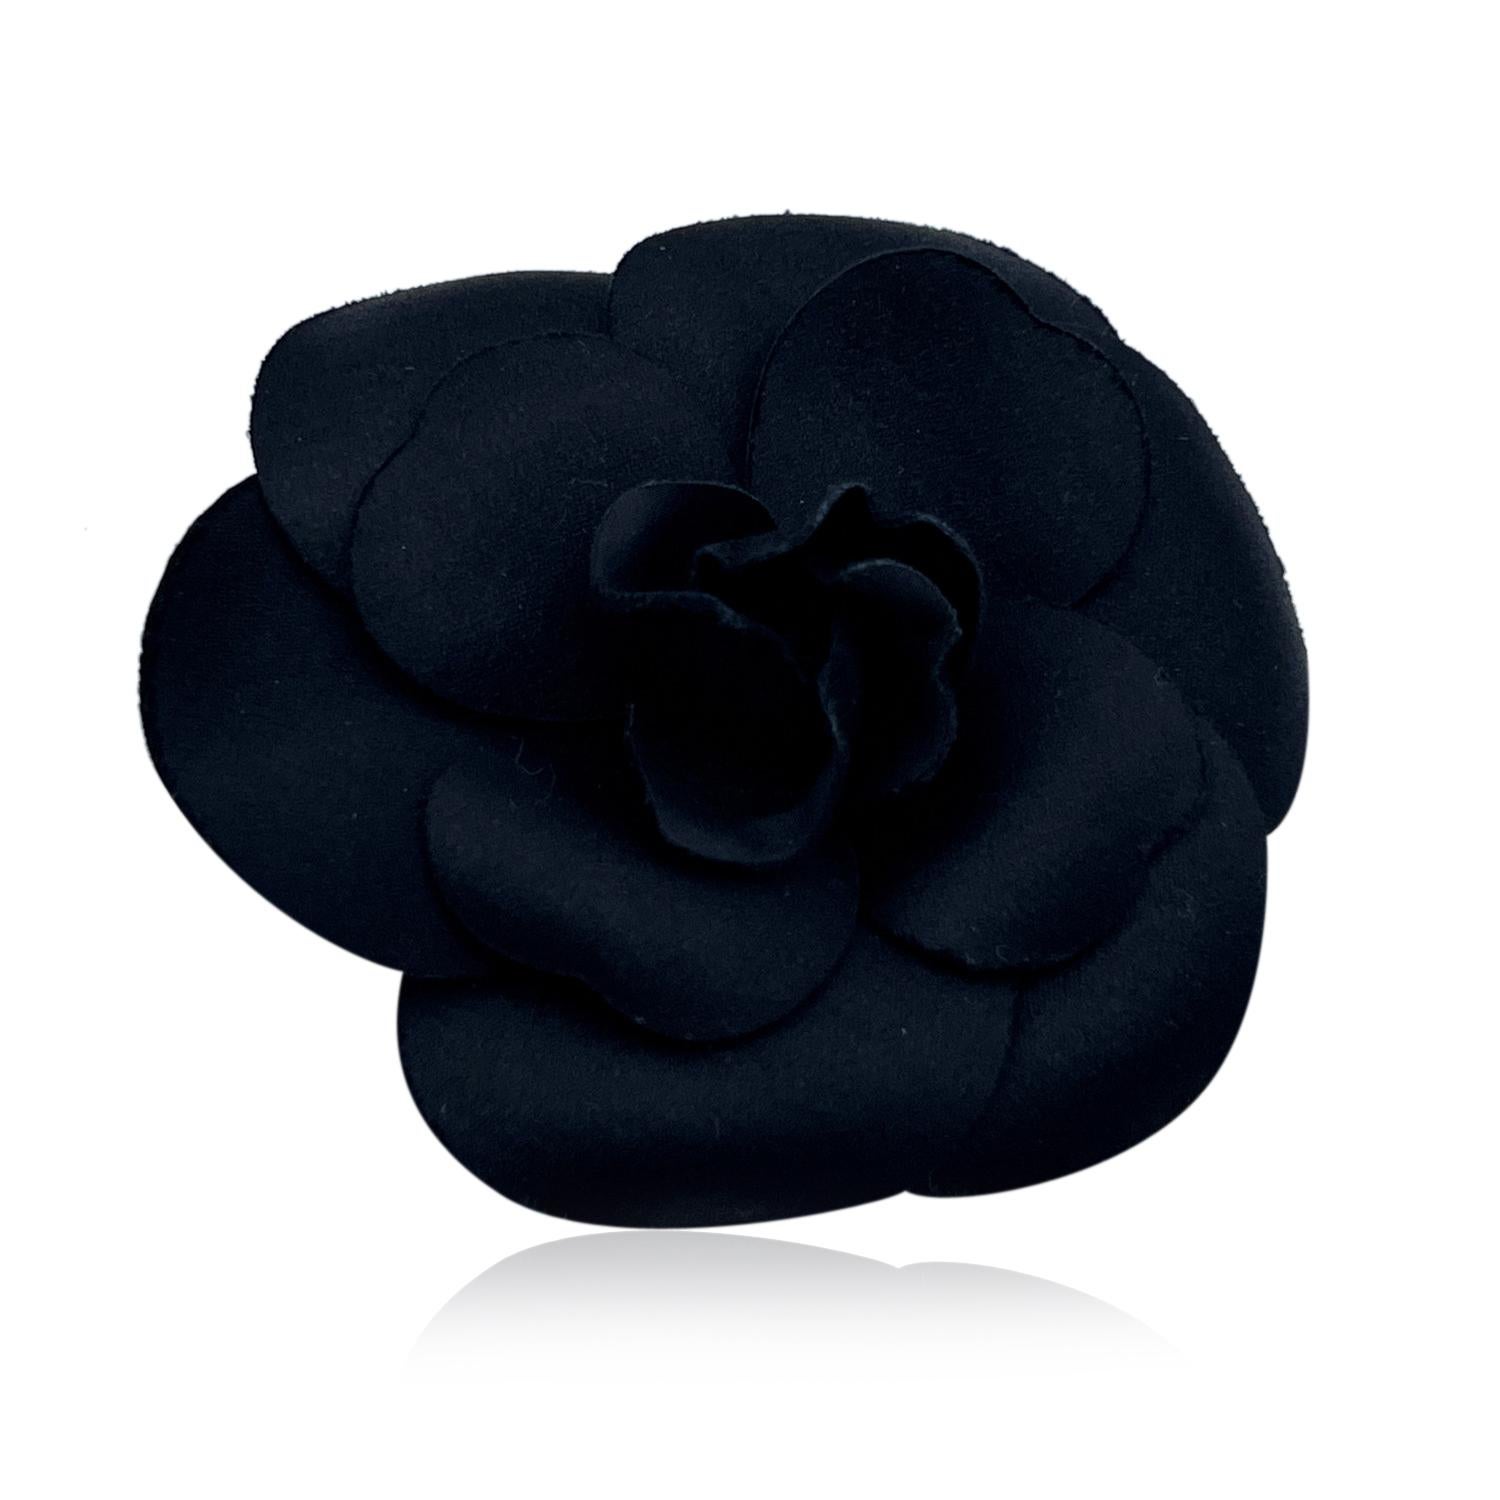 Chanel Vintage Camelia Camellia Flower Pin Brooch. Black satin petals. Safety pin closure. Measurements: diameter: 4.5 inches - 11.5 cm. 'CHANEL - CC - Made in France' oval tab on the back

Condition

A - EXCELLENT

Gently used. Please check the